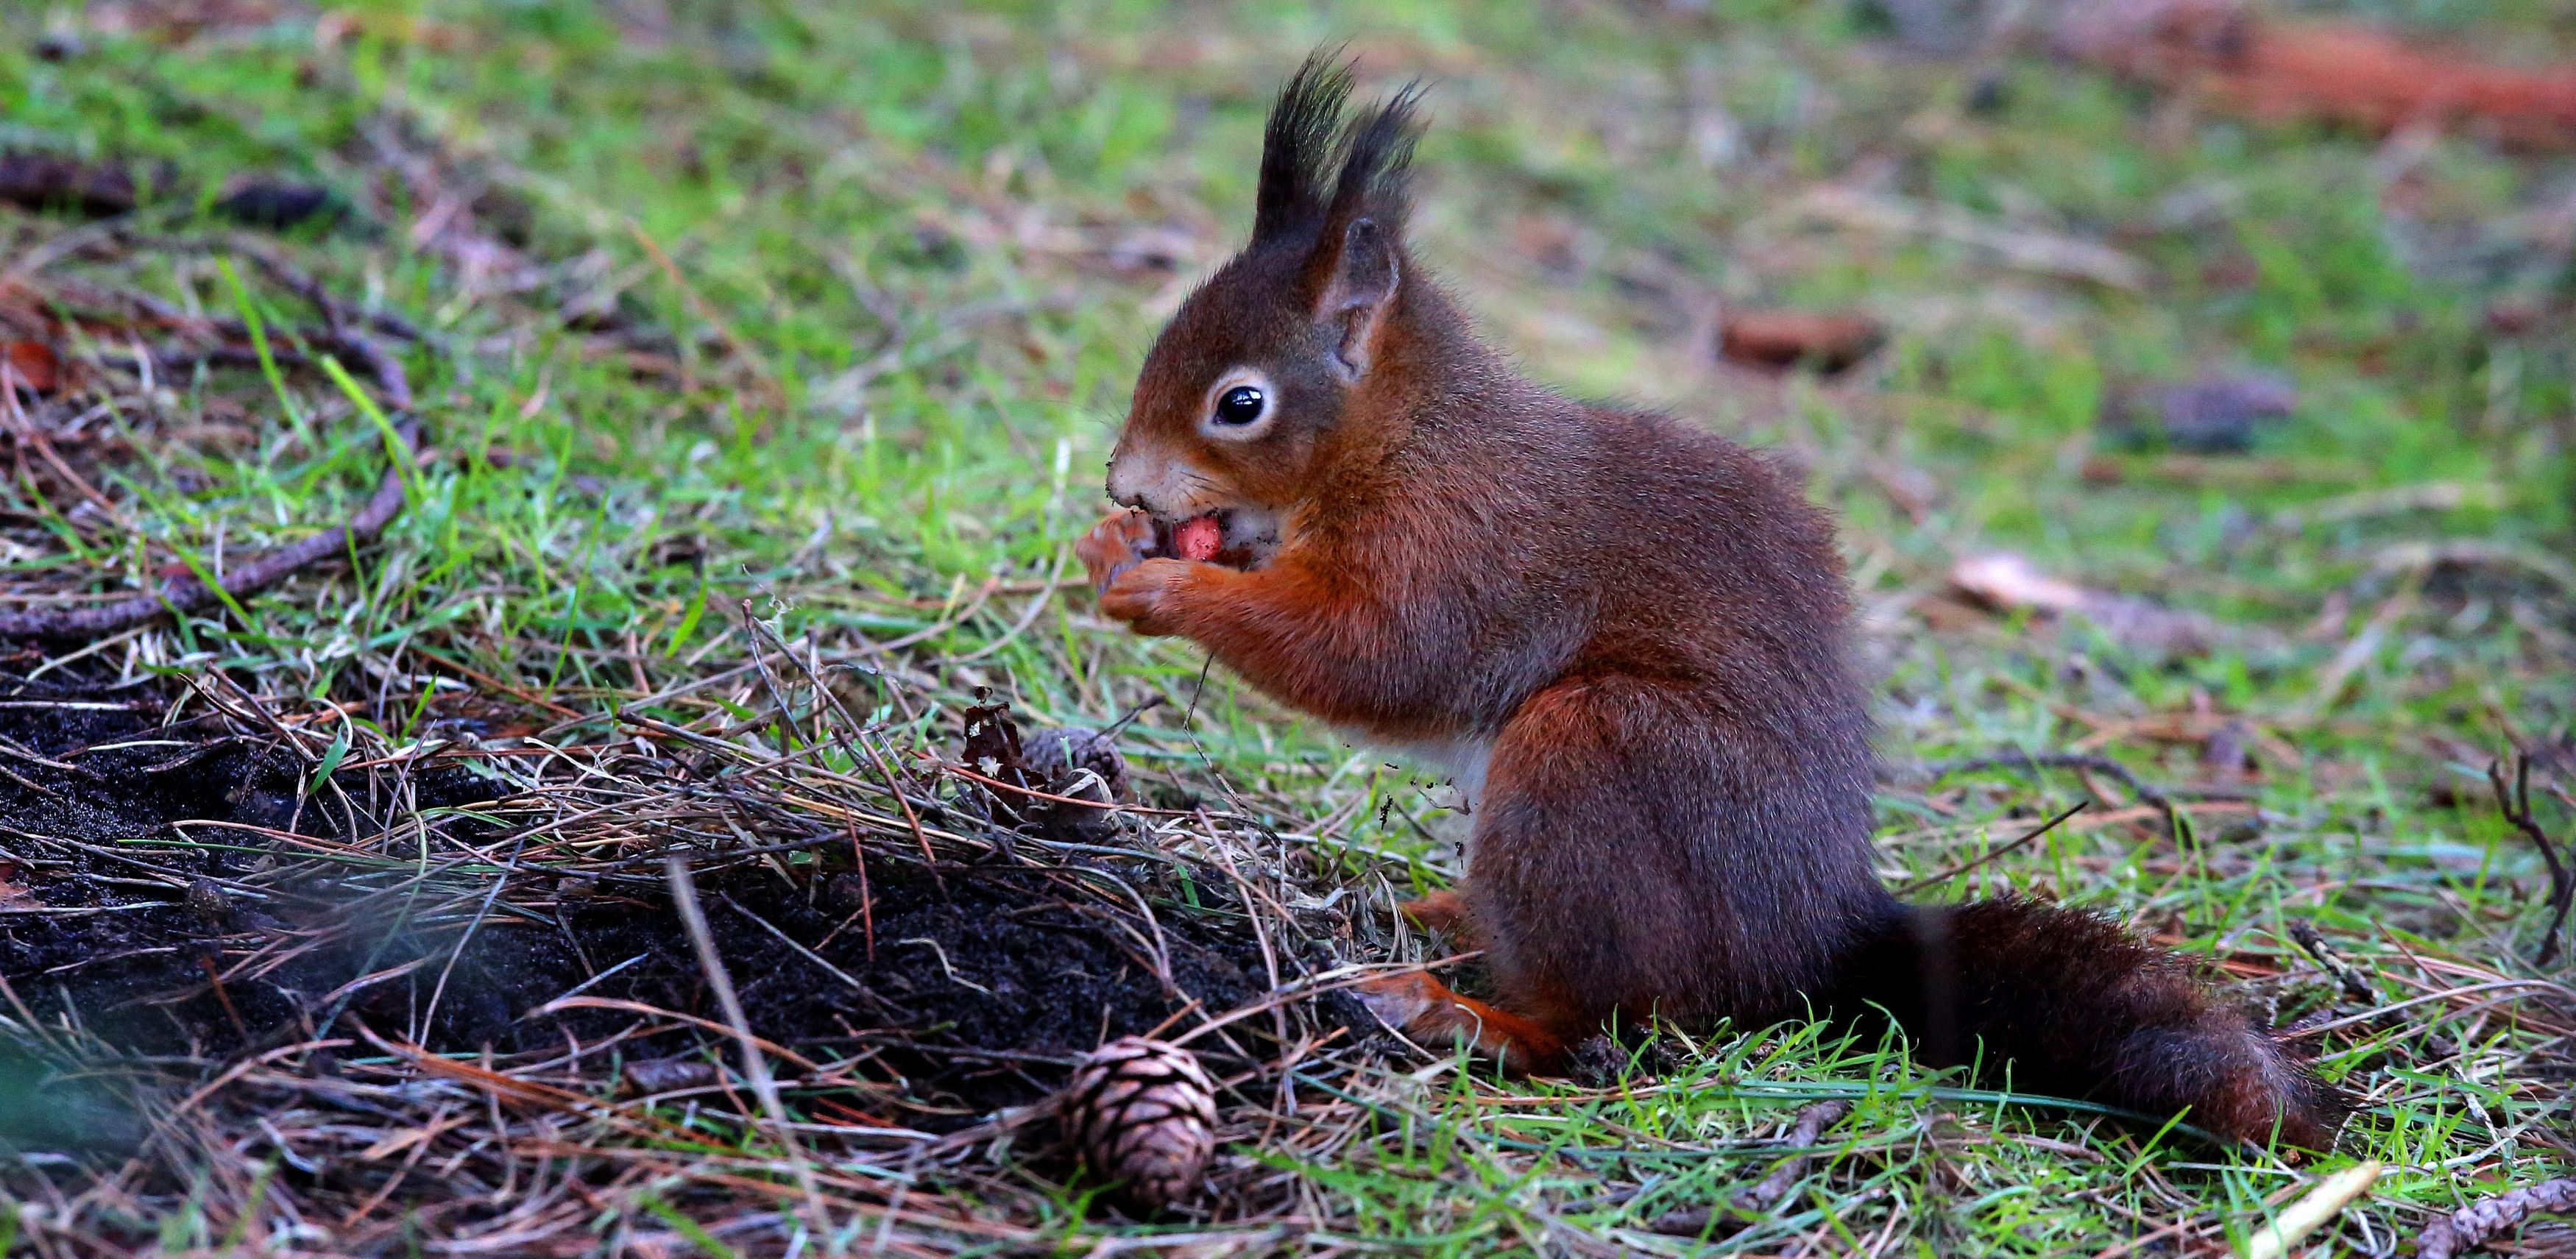 Native red squirrels can lose out to grey squirrels for food and living space